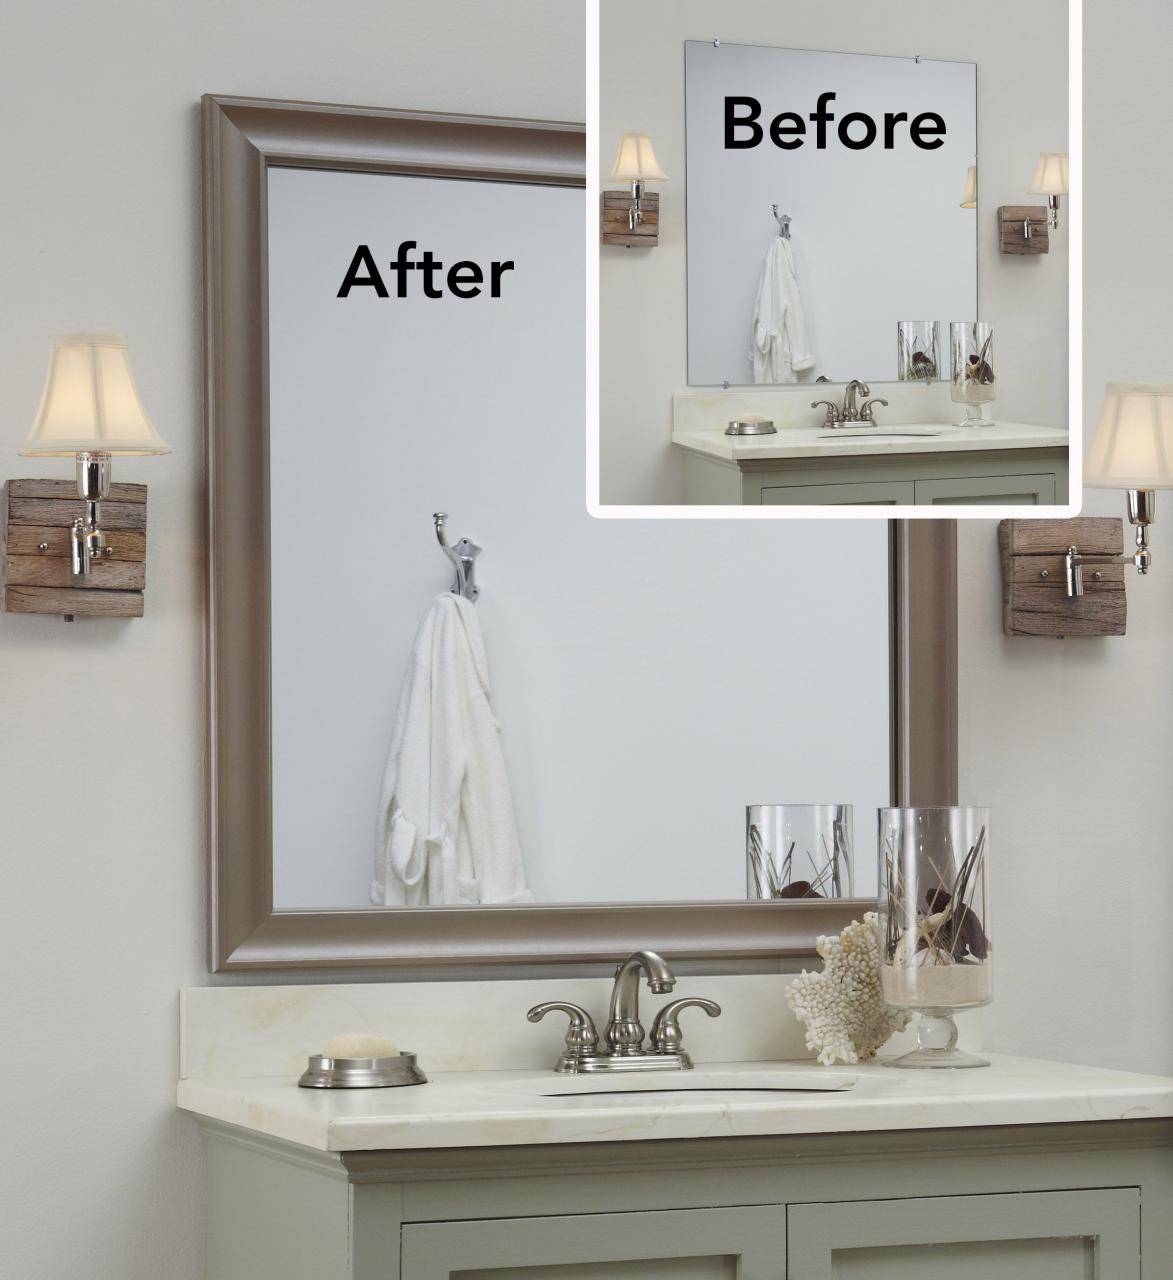 The "before" is a bare, plate glass mirror; the "after" a MirrorMate